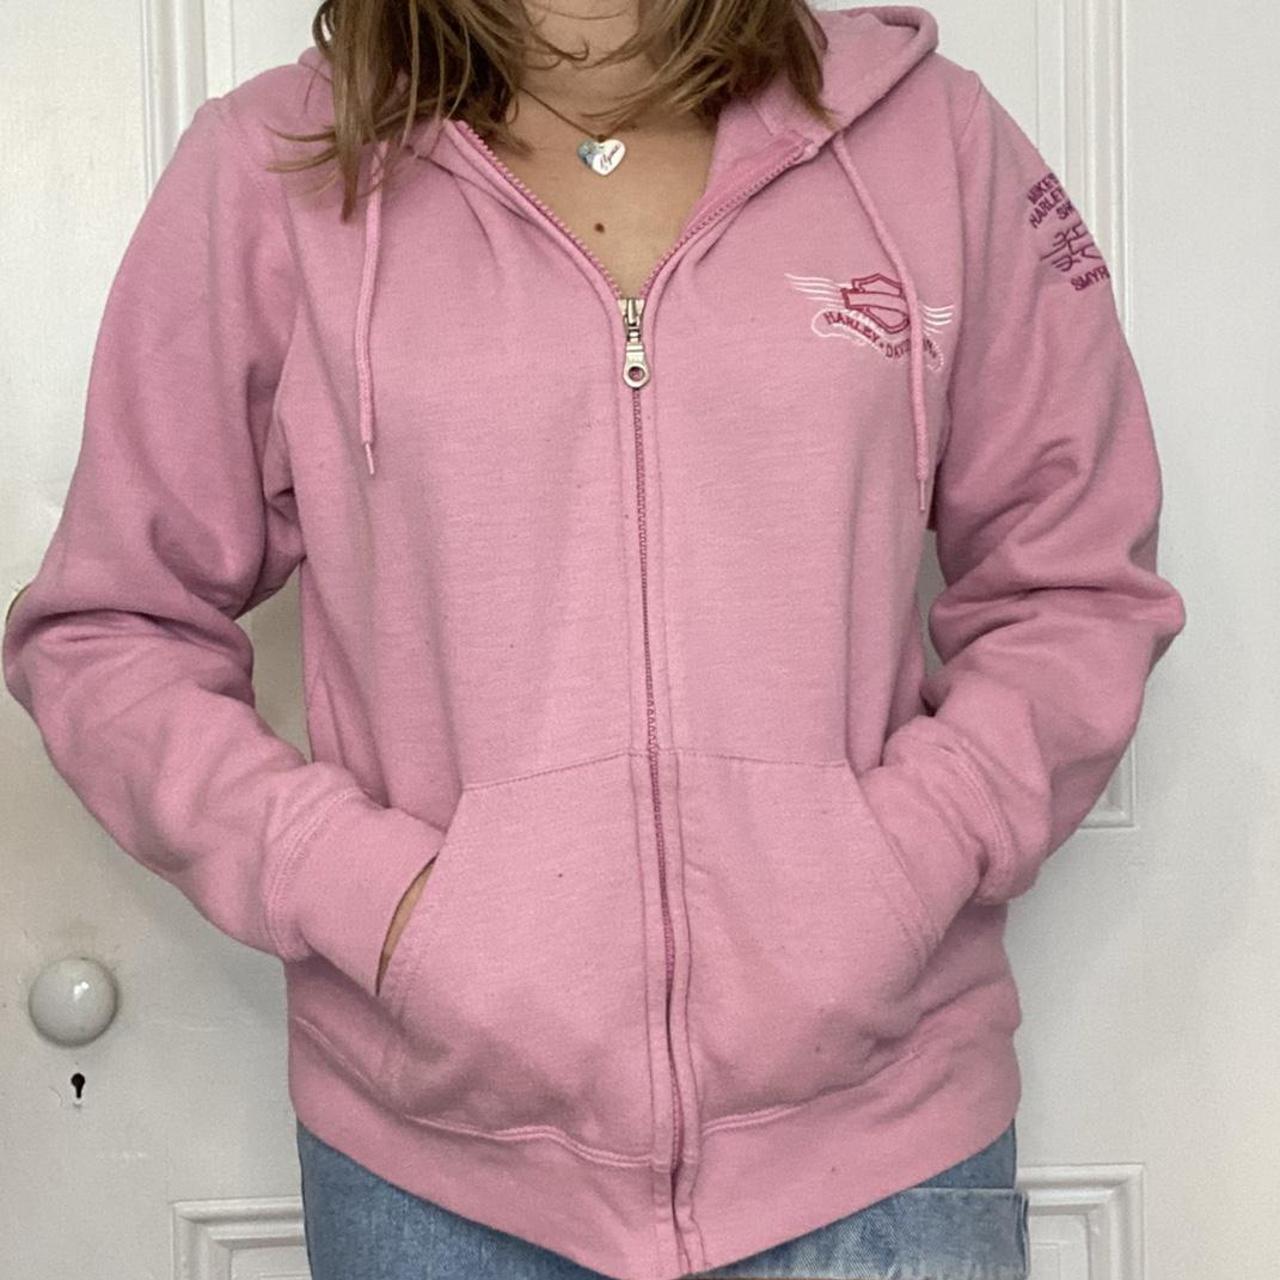 Product Image 2 - ֎The cutest pink zip up